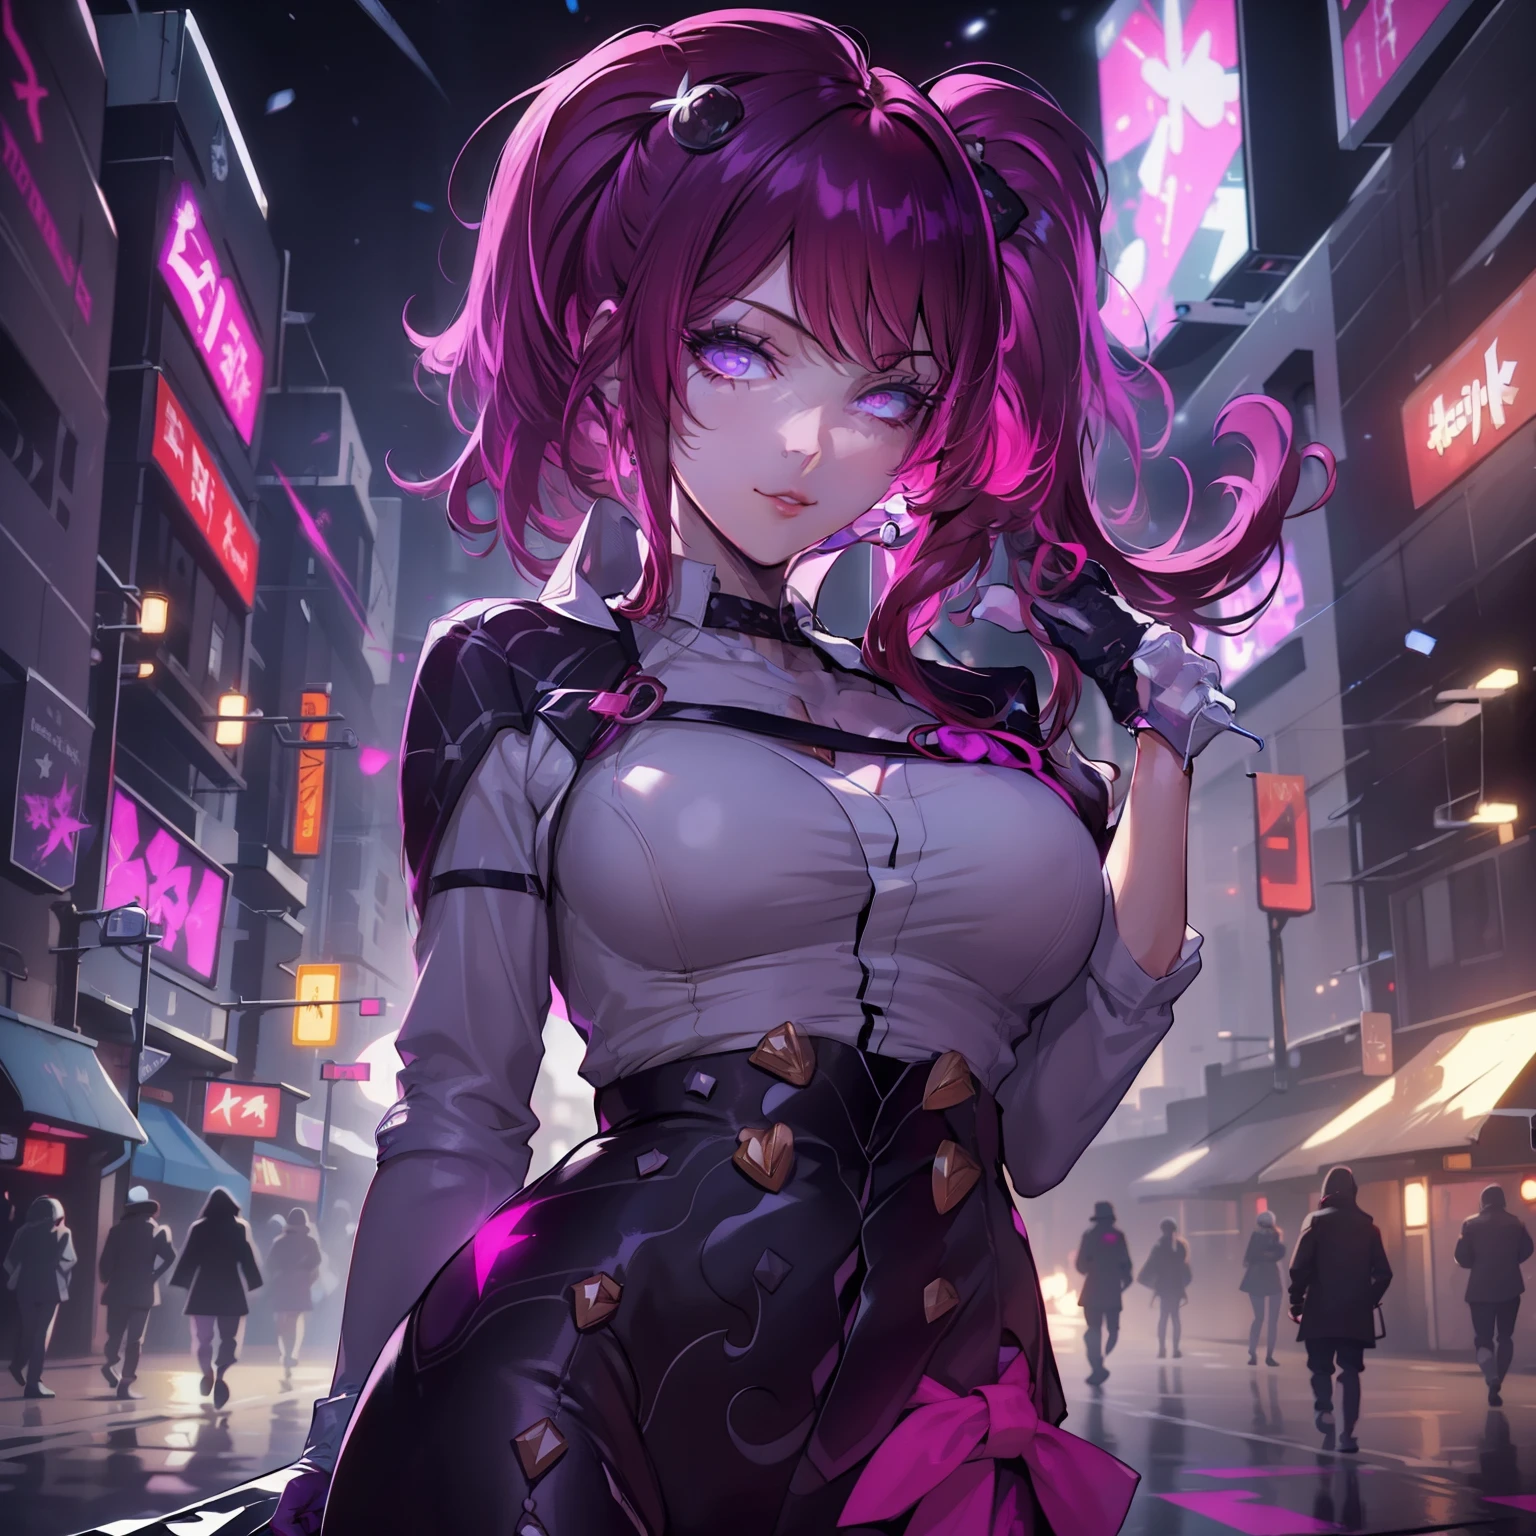 female , Un adolescente con cabello corto y blanco como la nieve , sporting a mysterious full-face that has glowing purple eyes , vestido con una llamativa camisa roja y un largo abrigo negro, Deftly wielding a pair of dual long swords, one bright in vibrant red and the other hypnotically purple.. The scene unfolds against the backdrop of a dystopian cyberpunk city at night.., pulsing with neon lights and a futuristic aura, All rendered in stunning high-resolution 8K quality